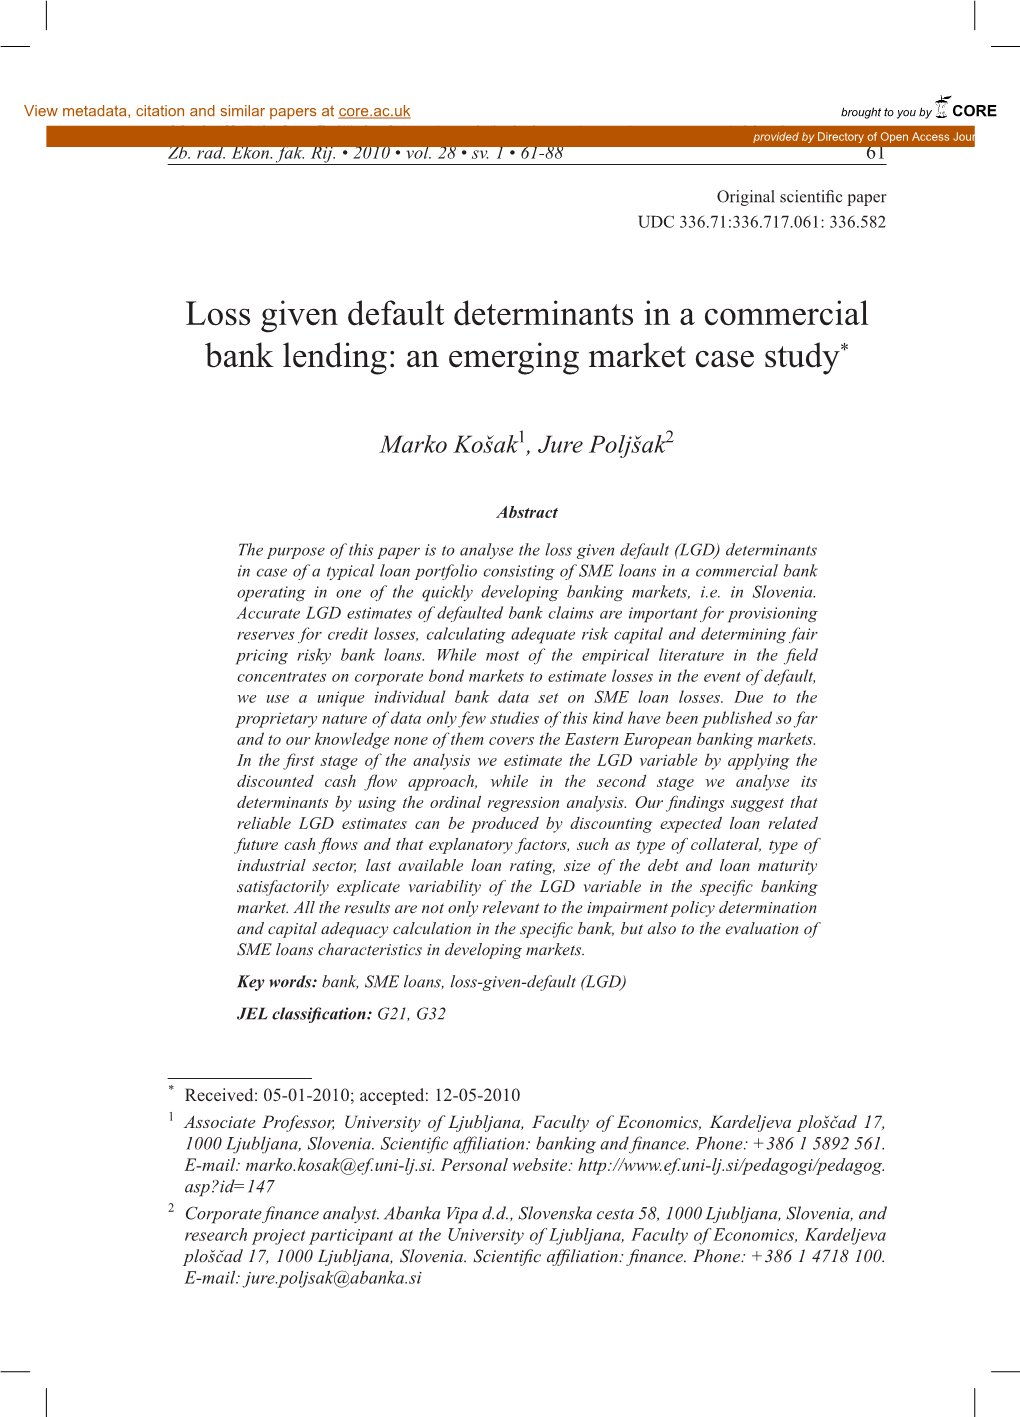 Loss Given Default Determinants in a Commercial Bank Lending: an Emerging Market Case Study*